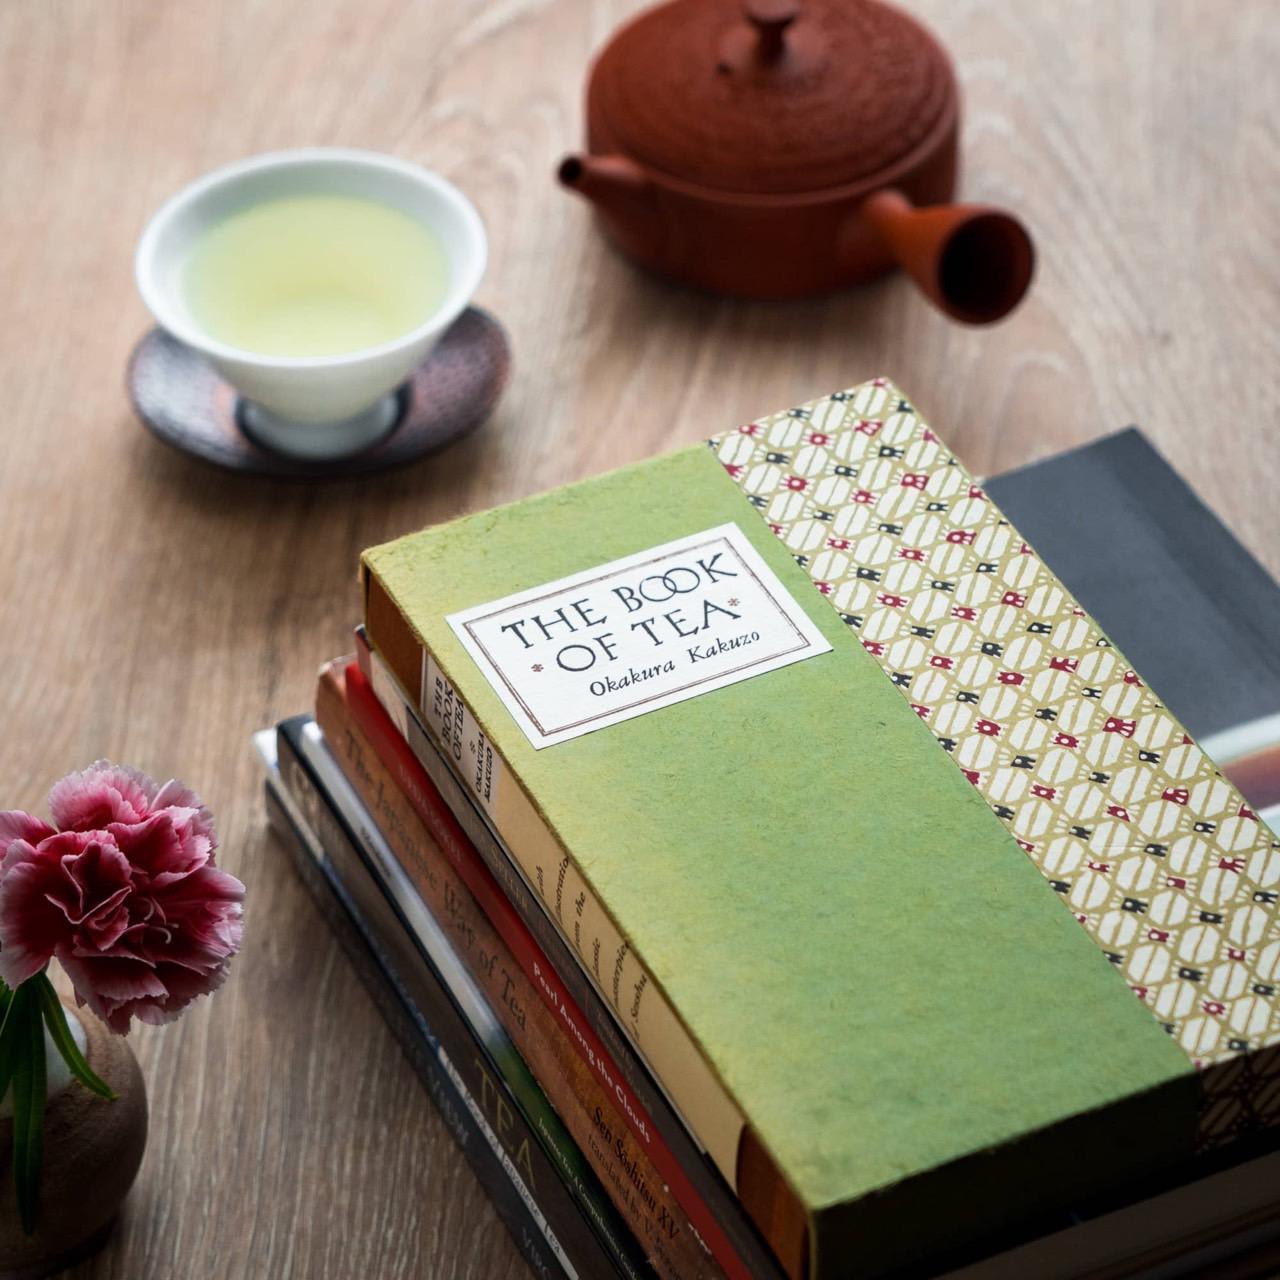 What are your favourite books about tea/tea culture?